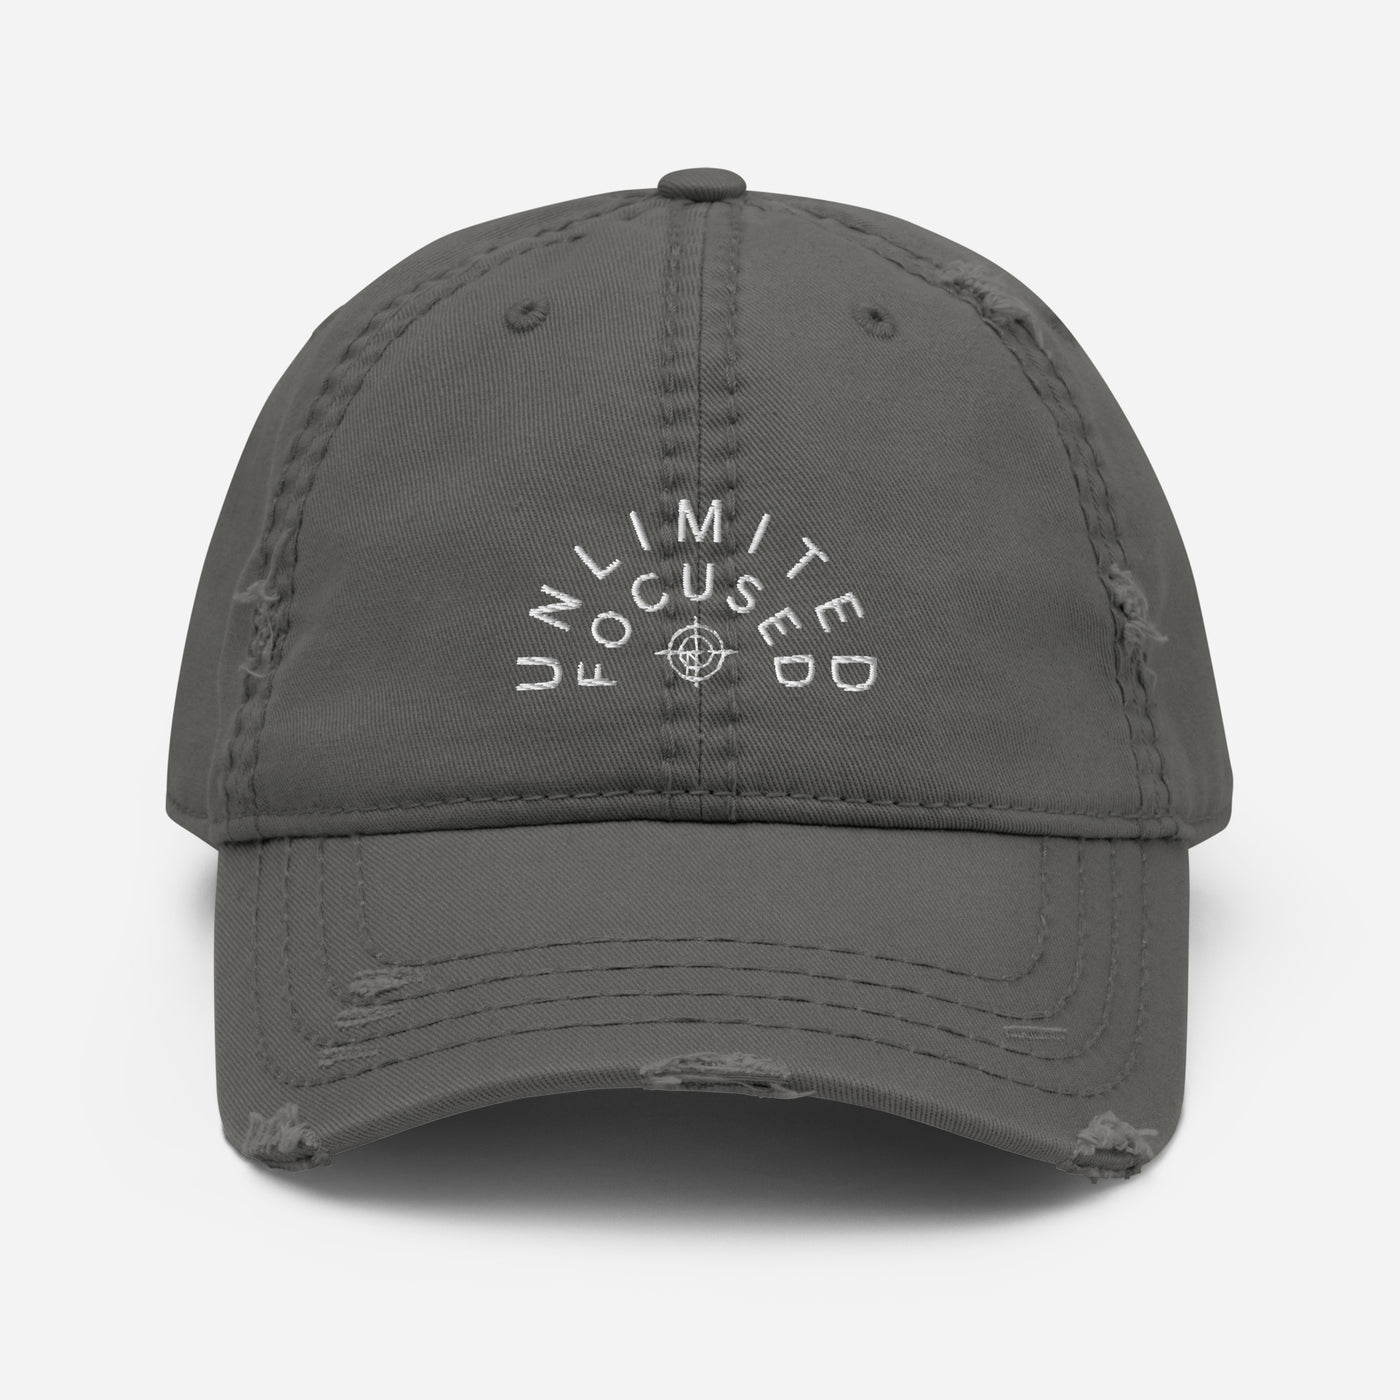 Distressed Charcoal Gray Dad Hat - Unlimited Focused